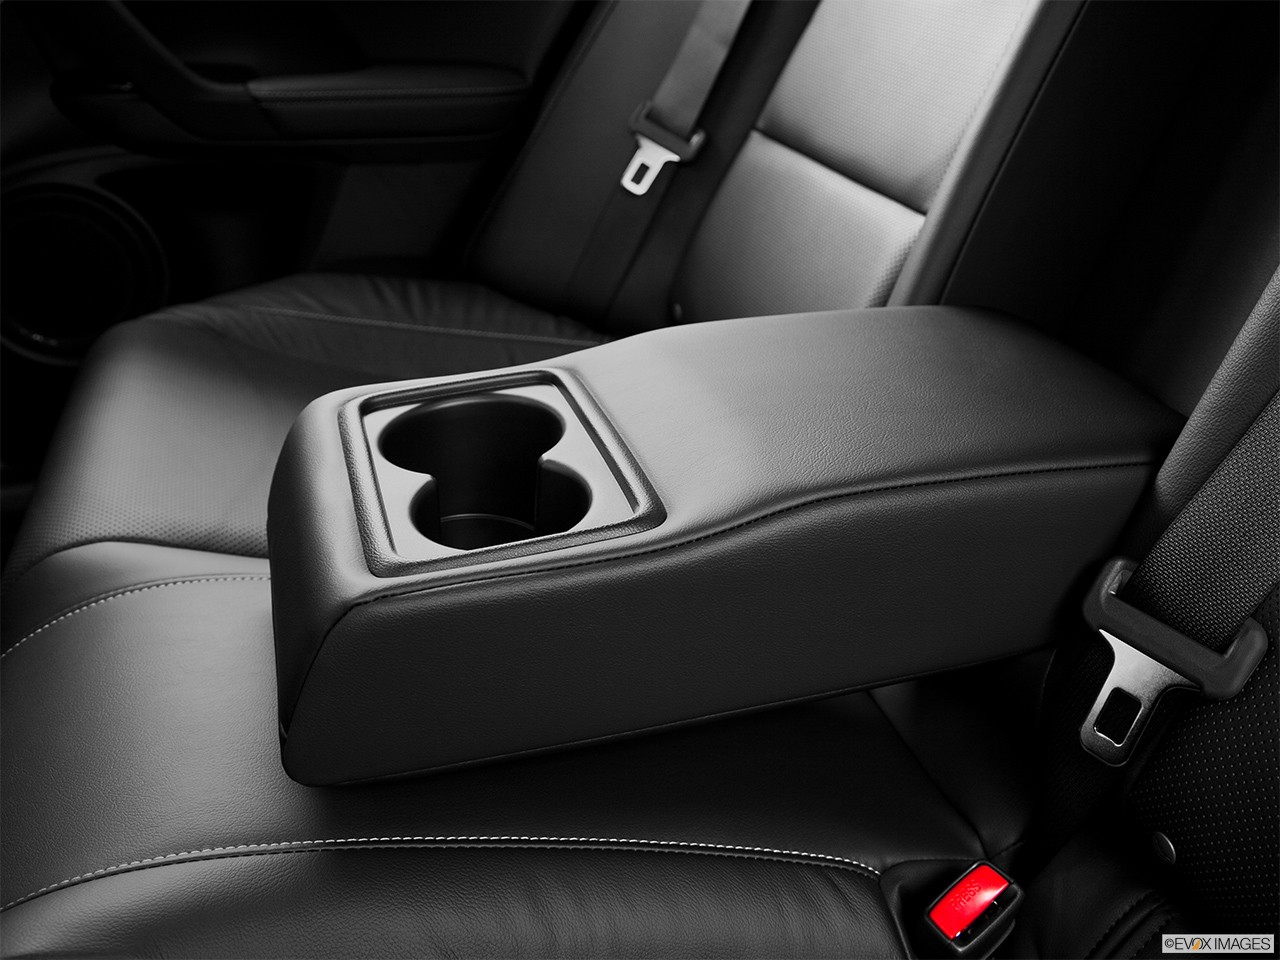 2013 Acura TSX 5-speed Automatic Rear center console with closed lid from driver's side looking down. 